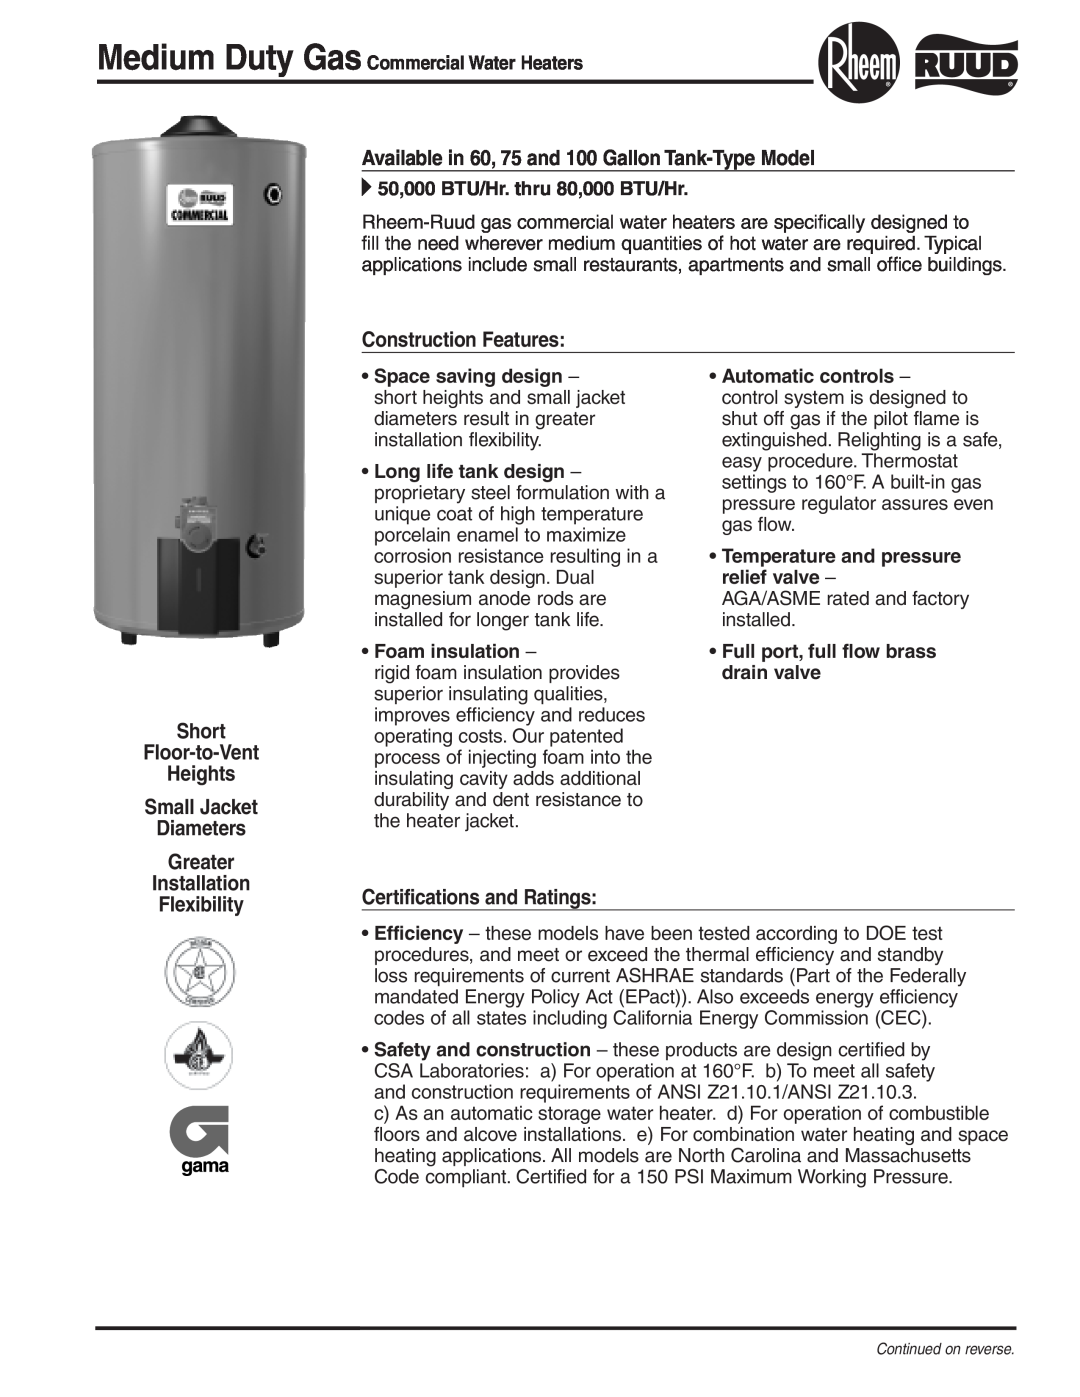 Rheem Commercial Water Heaters manual Available in 60, 75 and 100 GallonTank-Type Model, Construction Features 